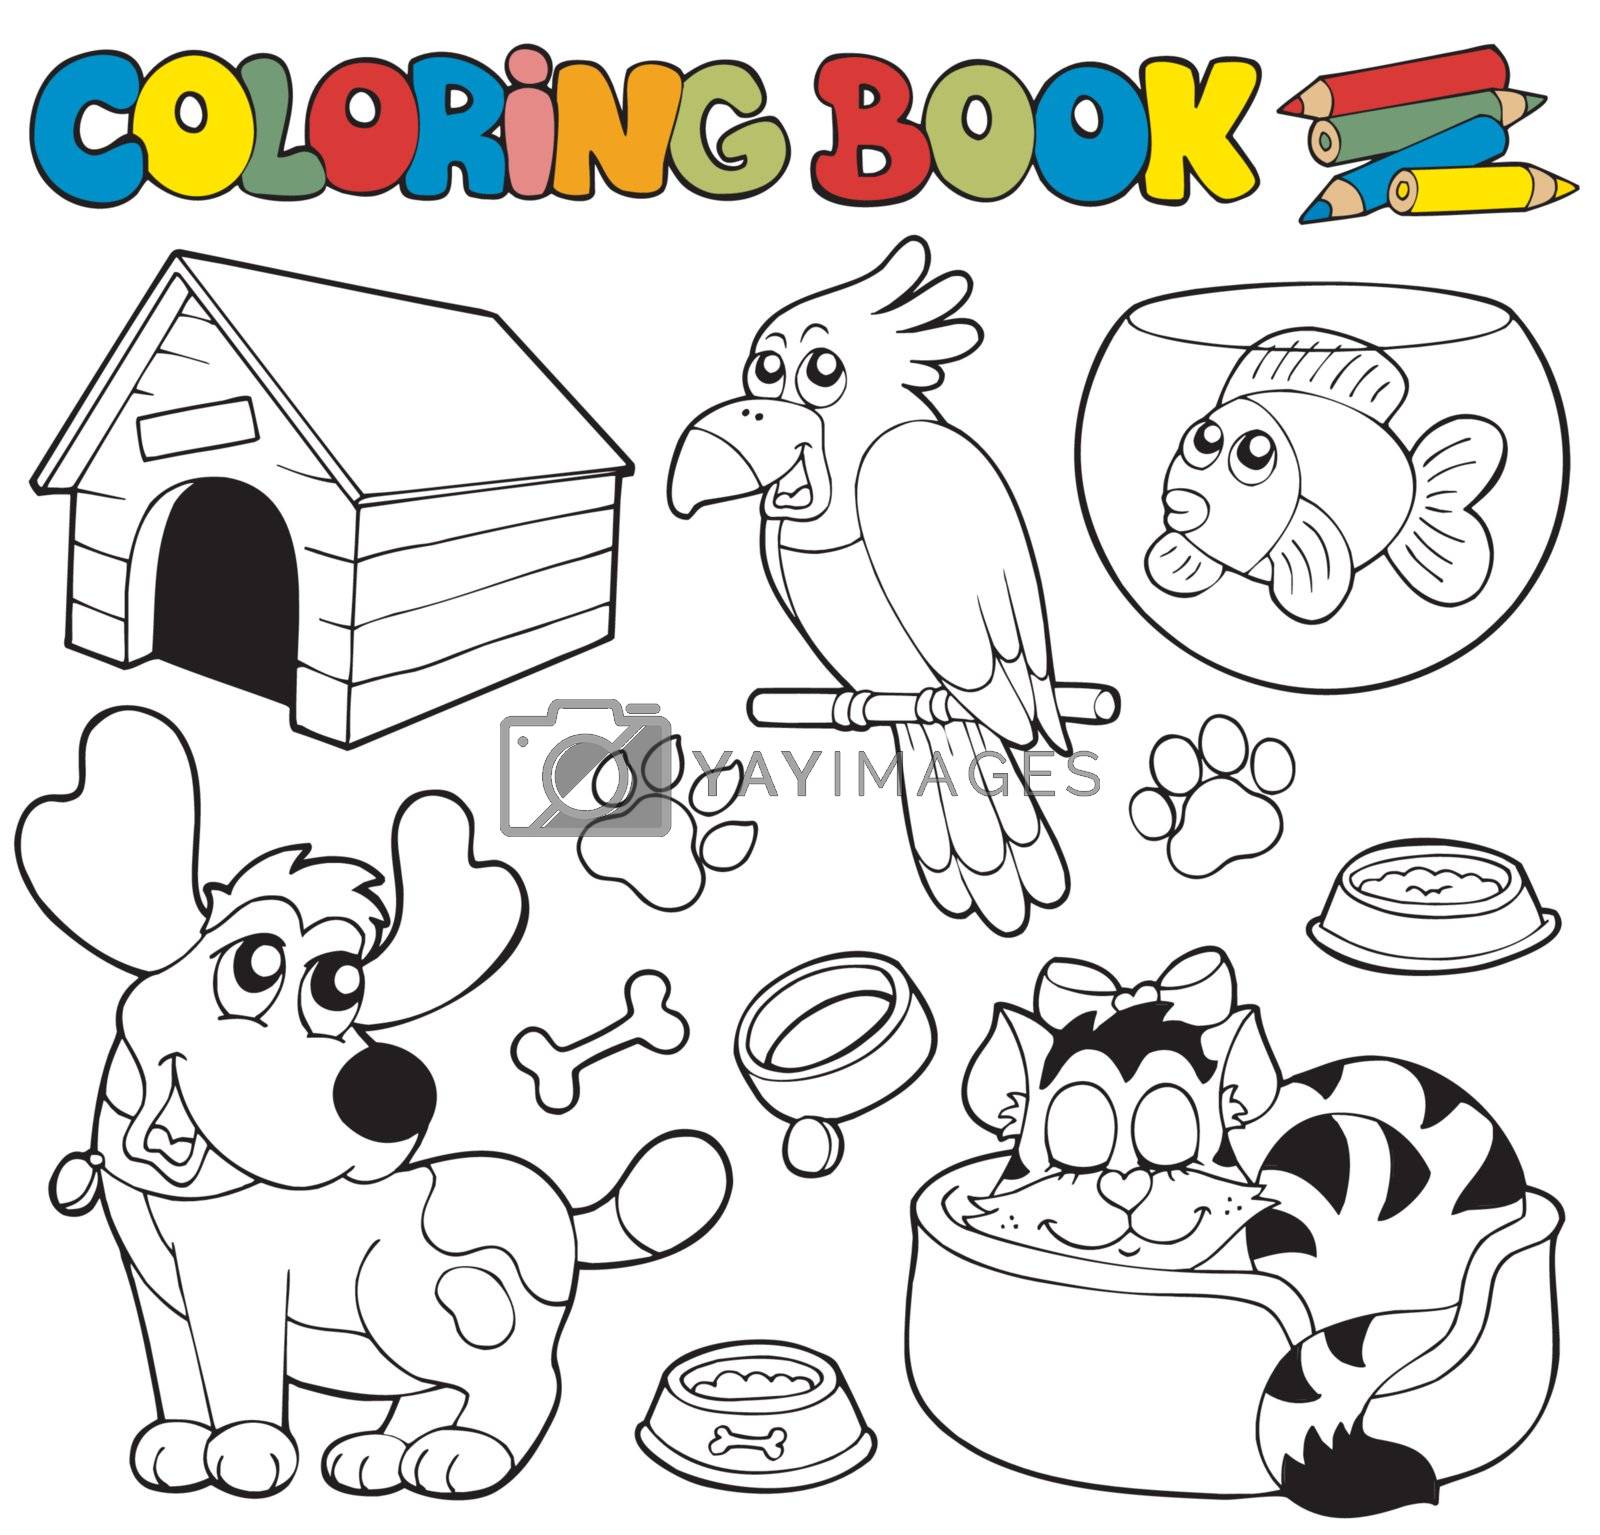 Coloring book with pets 1 - vector illustration.